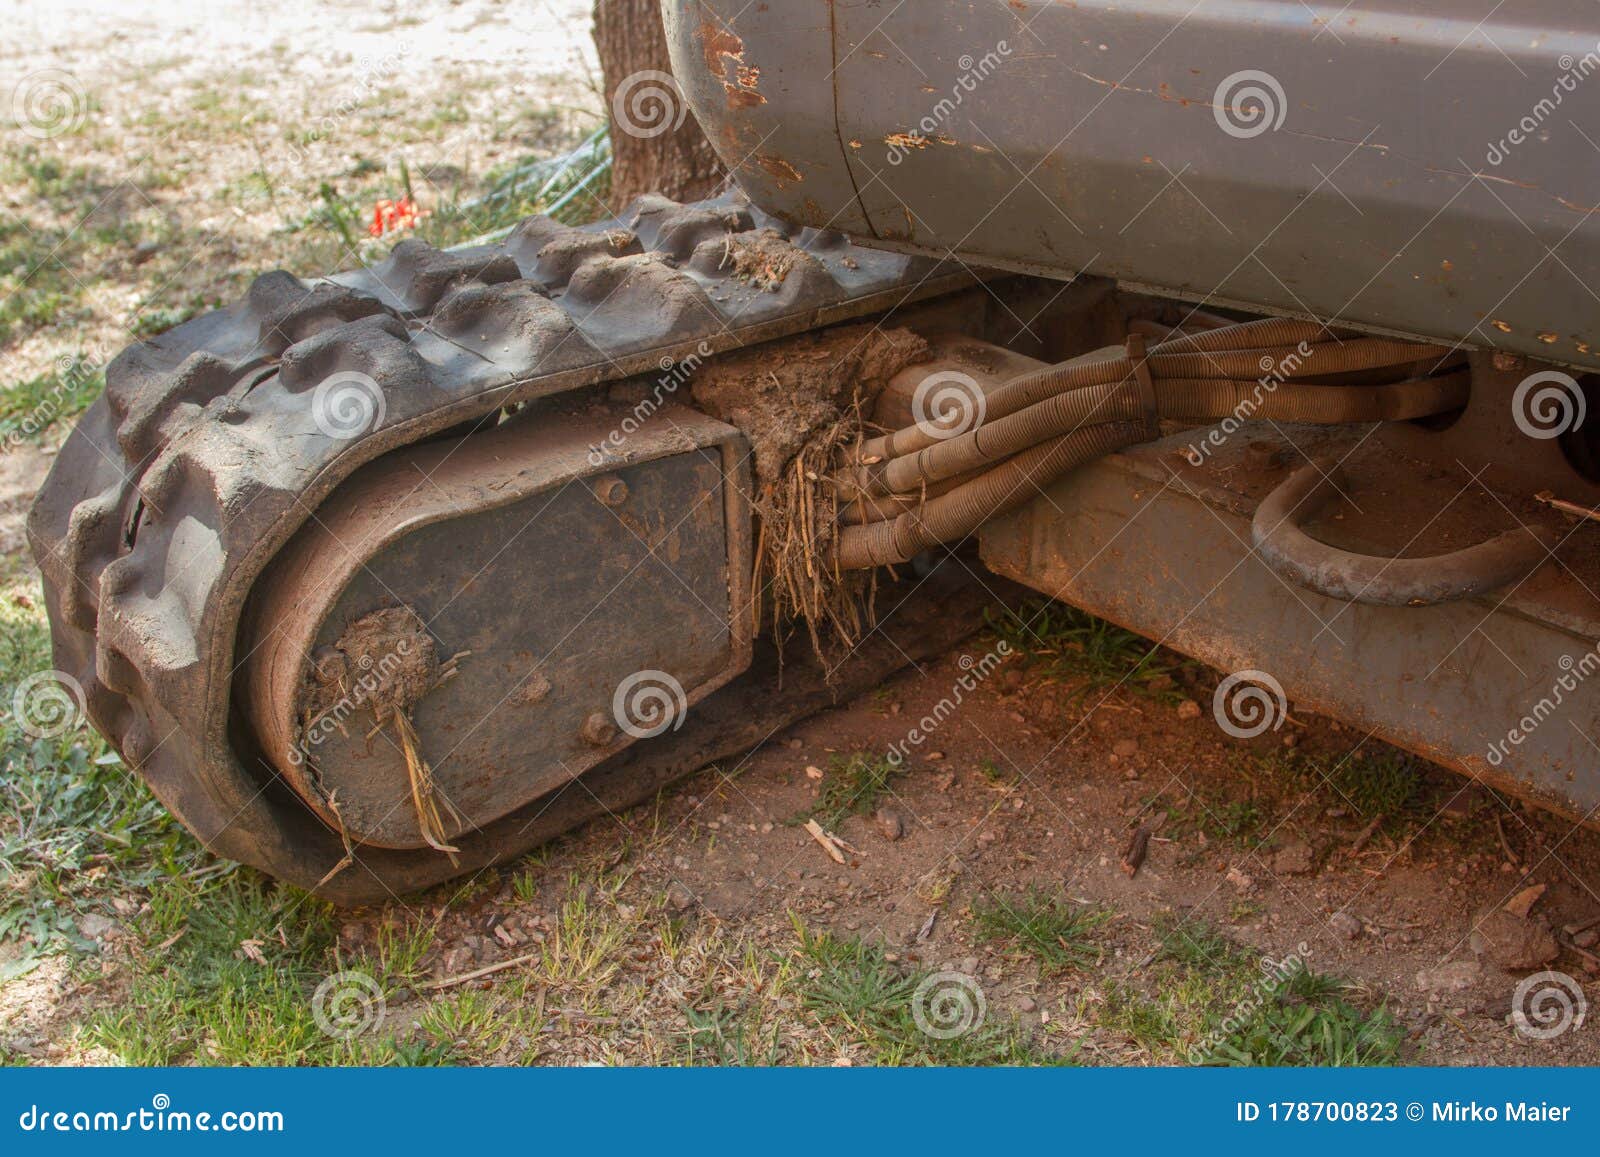 details of crawler excavator such as the controls the cloches the bucket the hydraulic pumps the tracks